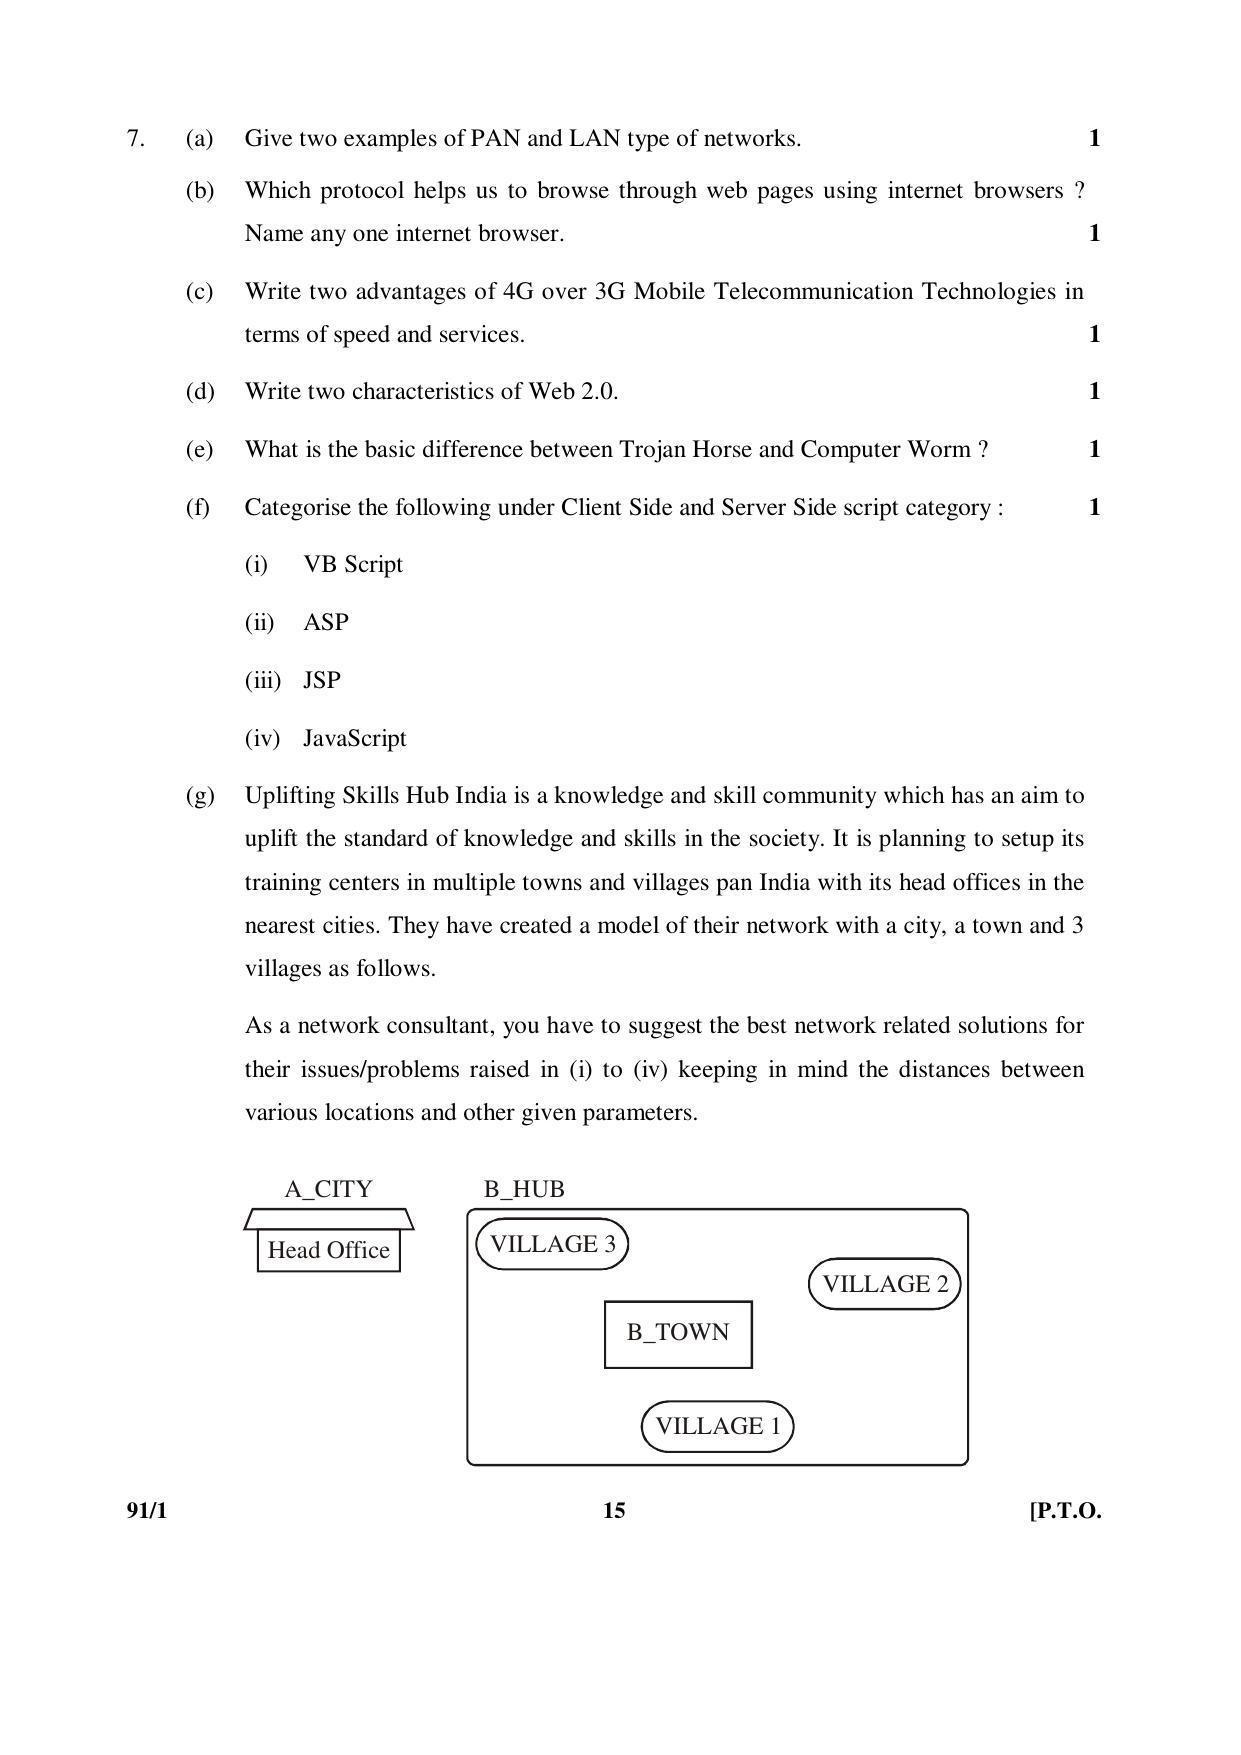 CBSE Class 12 91-1 COMPUTER SCIENCE 2016 Question Paper - Page 15